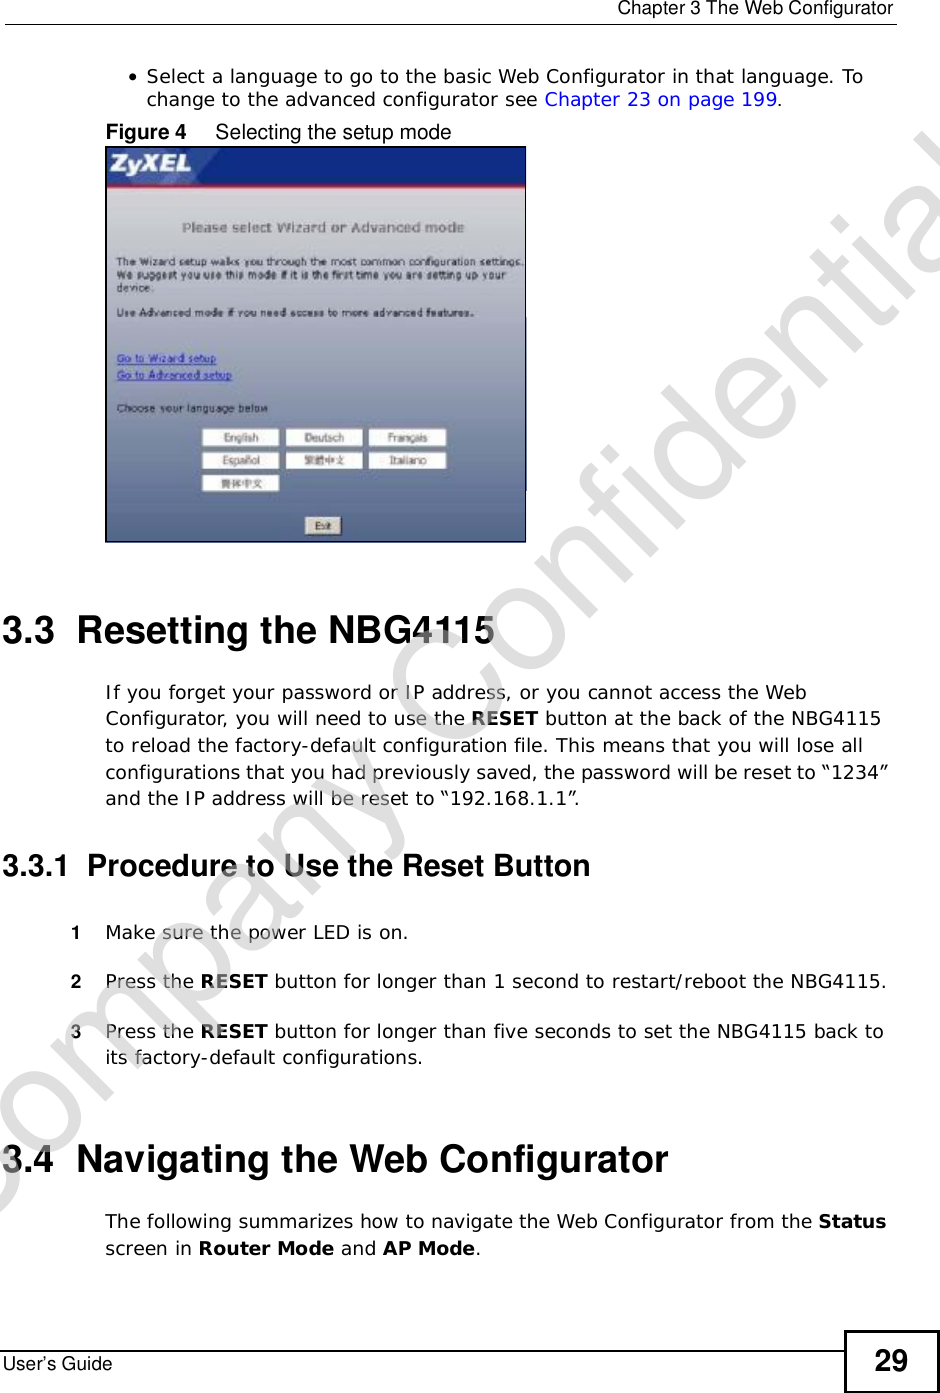  Chapter 3The Web ConfiguratorUser’s Guide 29•Select a language to go to the basic Web Configurator in that language. To change to the advanced configurator see Chapter 23 on page 199.Figure 4     Selecting the setup mode3.3  Resetting the NBG4115If you forget your password or IP address, or you cannot access the Web Configurator, you will need to use the RESET button at the back of the NBG4115 to reload the factory-default configuration file. This means that you will lose all configurations that you had previously saved, the password will be reset to “1234” and the IP address will be reset to “192.168.1.1”.3.3.1  Procedure to Use the Reset Button1Make sure the power LED is on.2Press the RESET button for longer than 1 second to restart/reboot the NBG4115.3Press the RESET button for longer than five seconds to set the NBG4115 back to its factory-default configurations.3.4  Navigating the Web Configurator    The following summarizes how to navigate the Web Configurator from the Statusscreen in Router Mode and AP Mode.Company Confidential